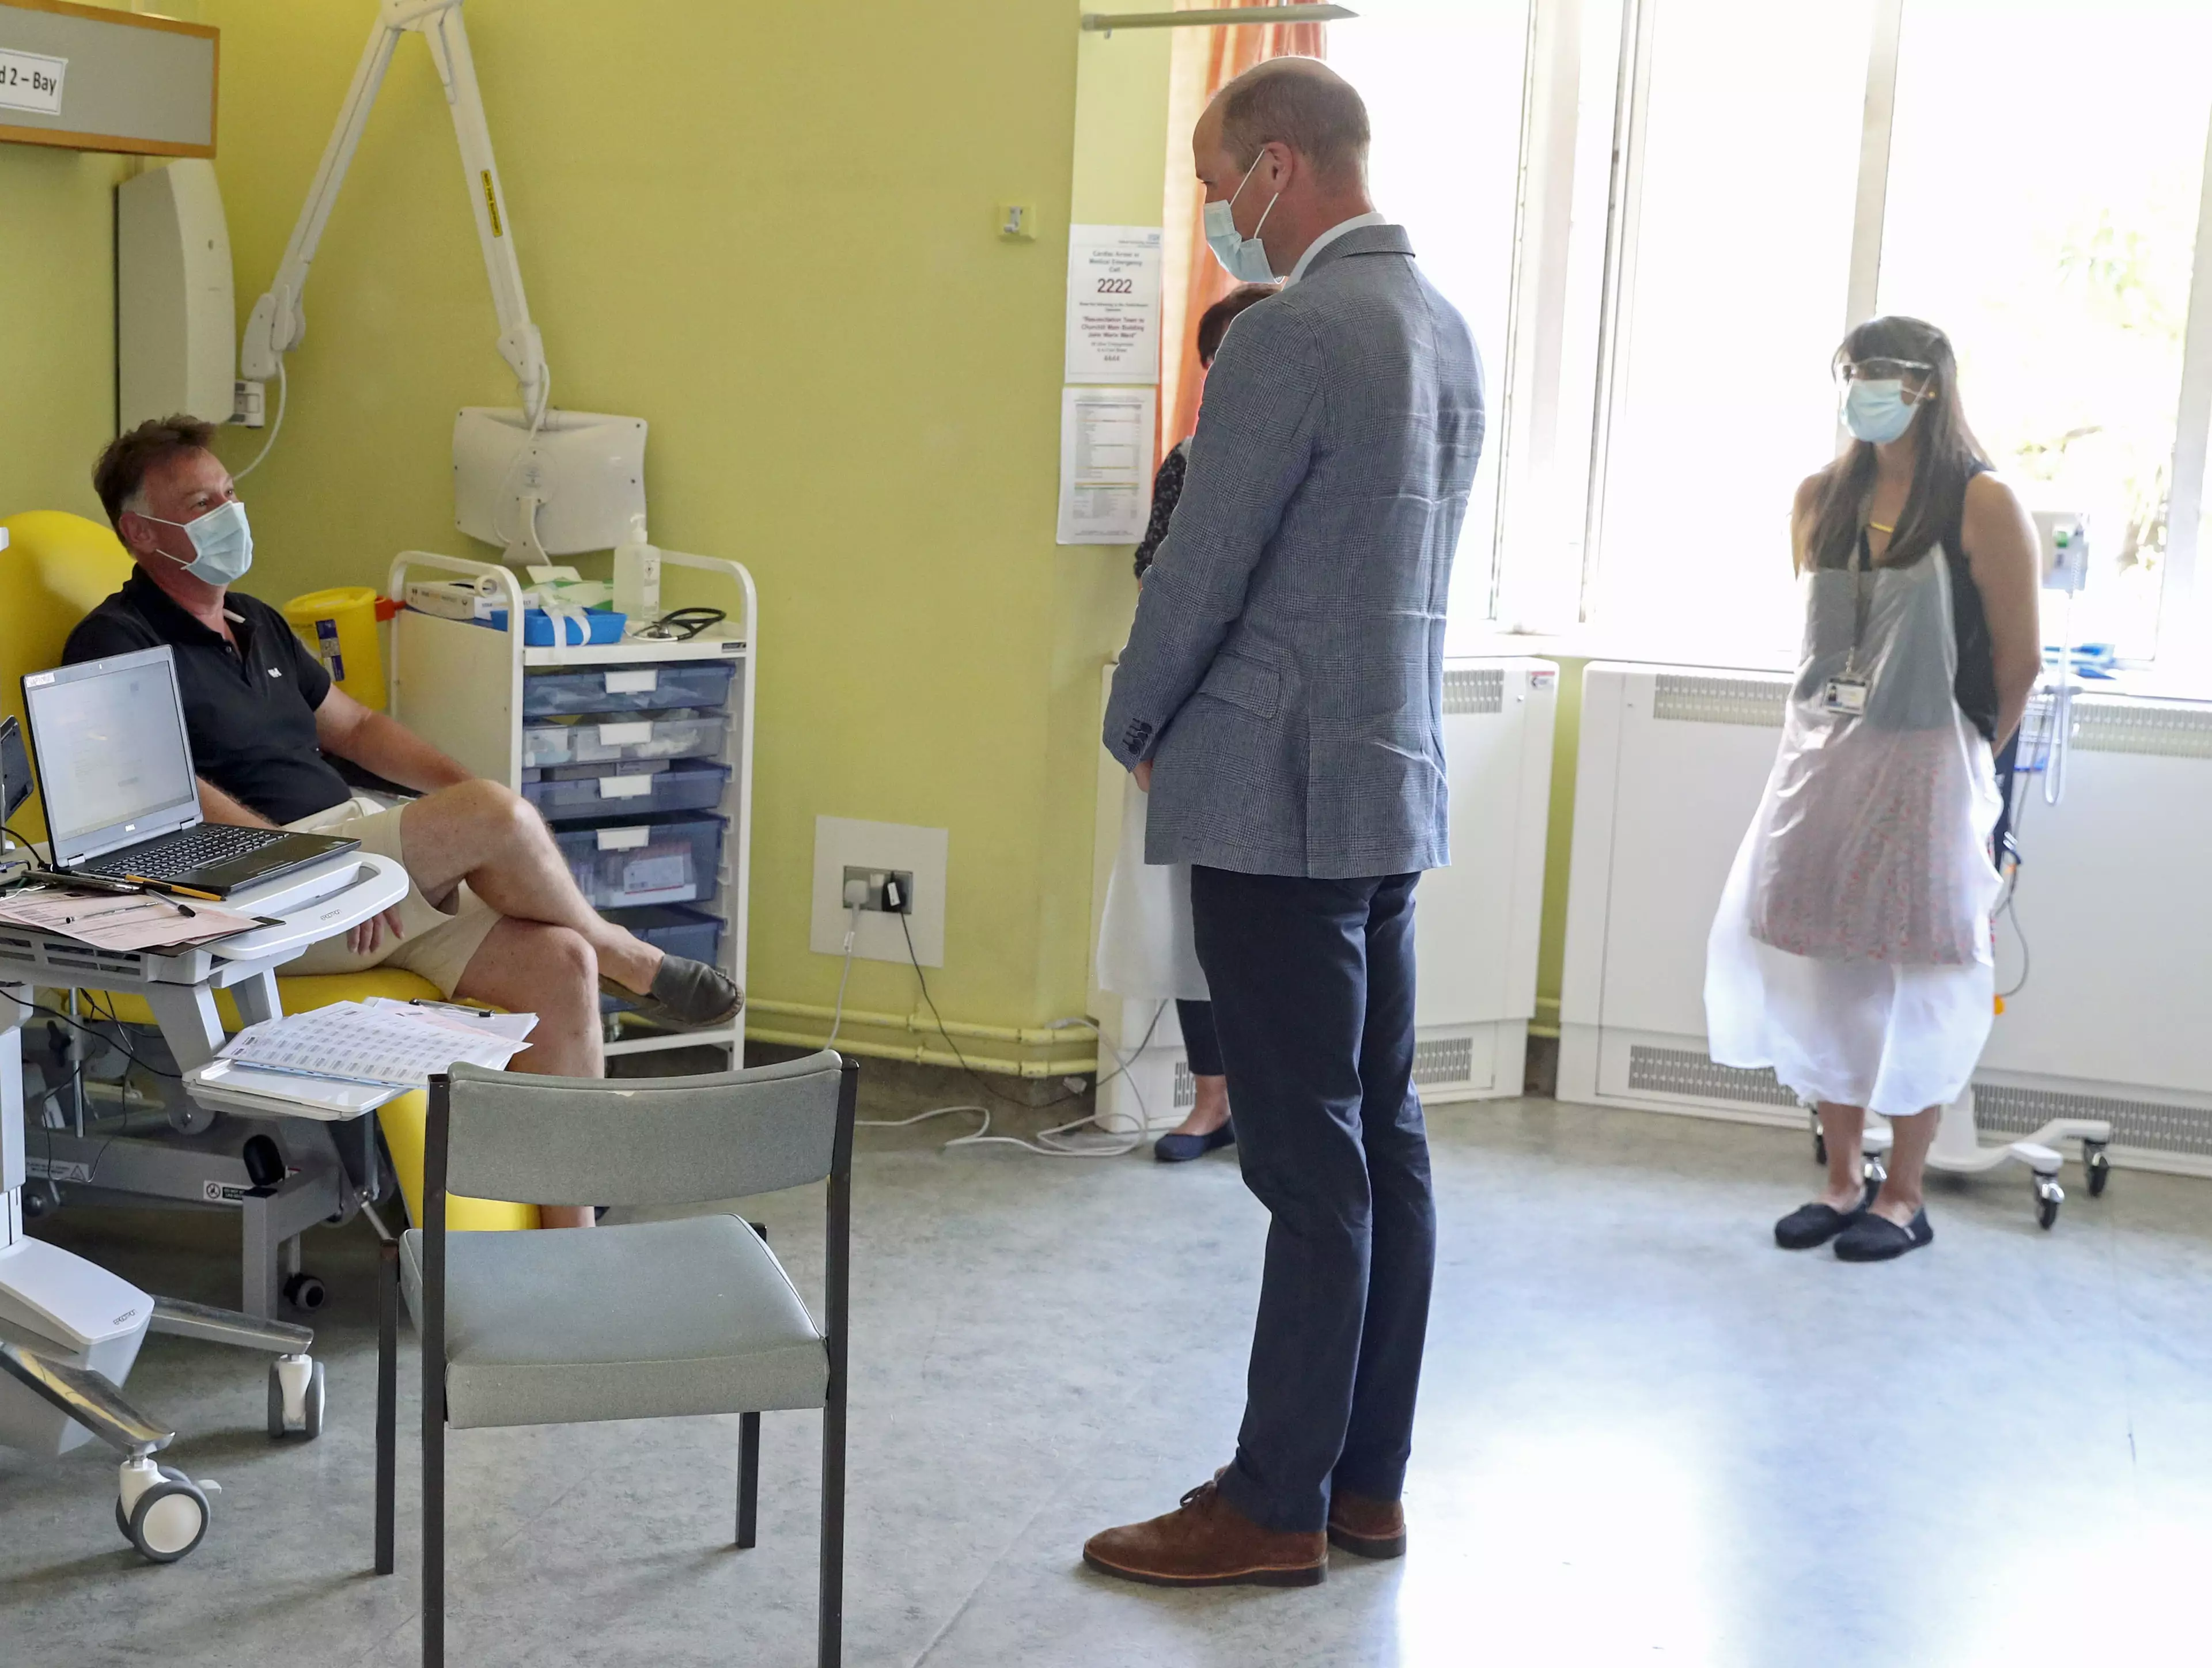 The Duke of Cambridge visits one of the participants in the Oxford vaccine trial.